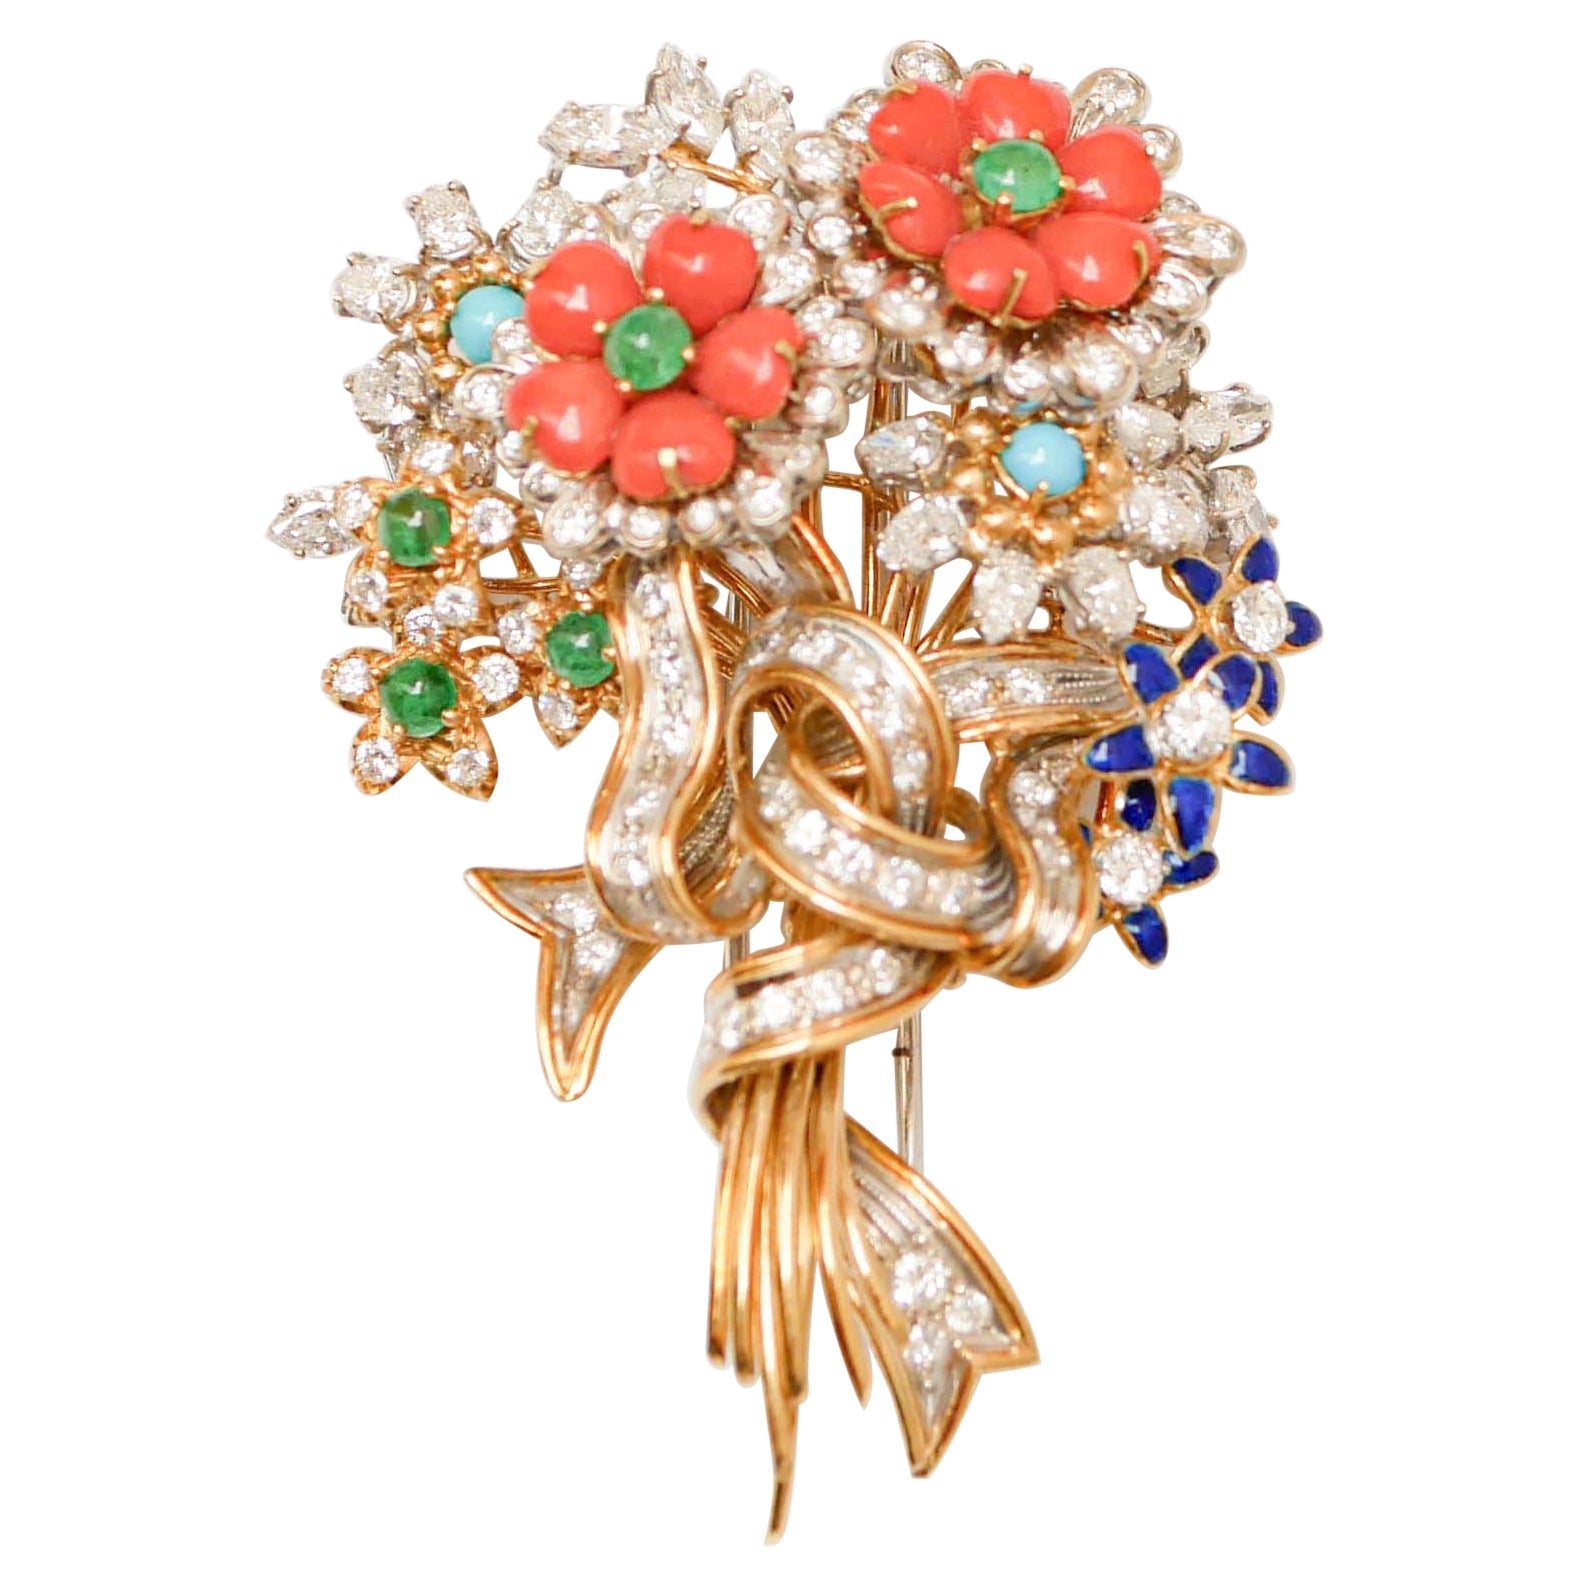 Coral, Emeralds, Diamonds, Turquoise, Enamel, 18Kt  Gold and Platinum Brooch.